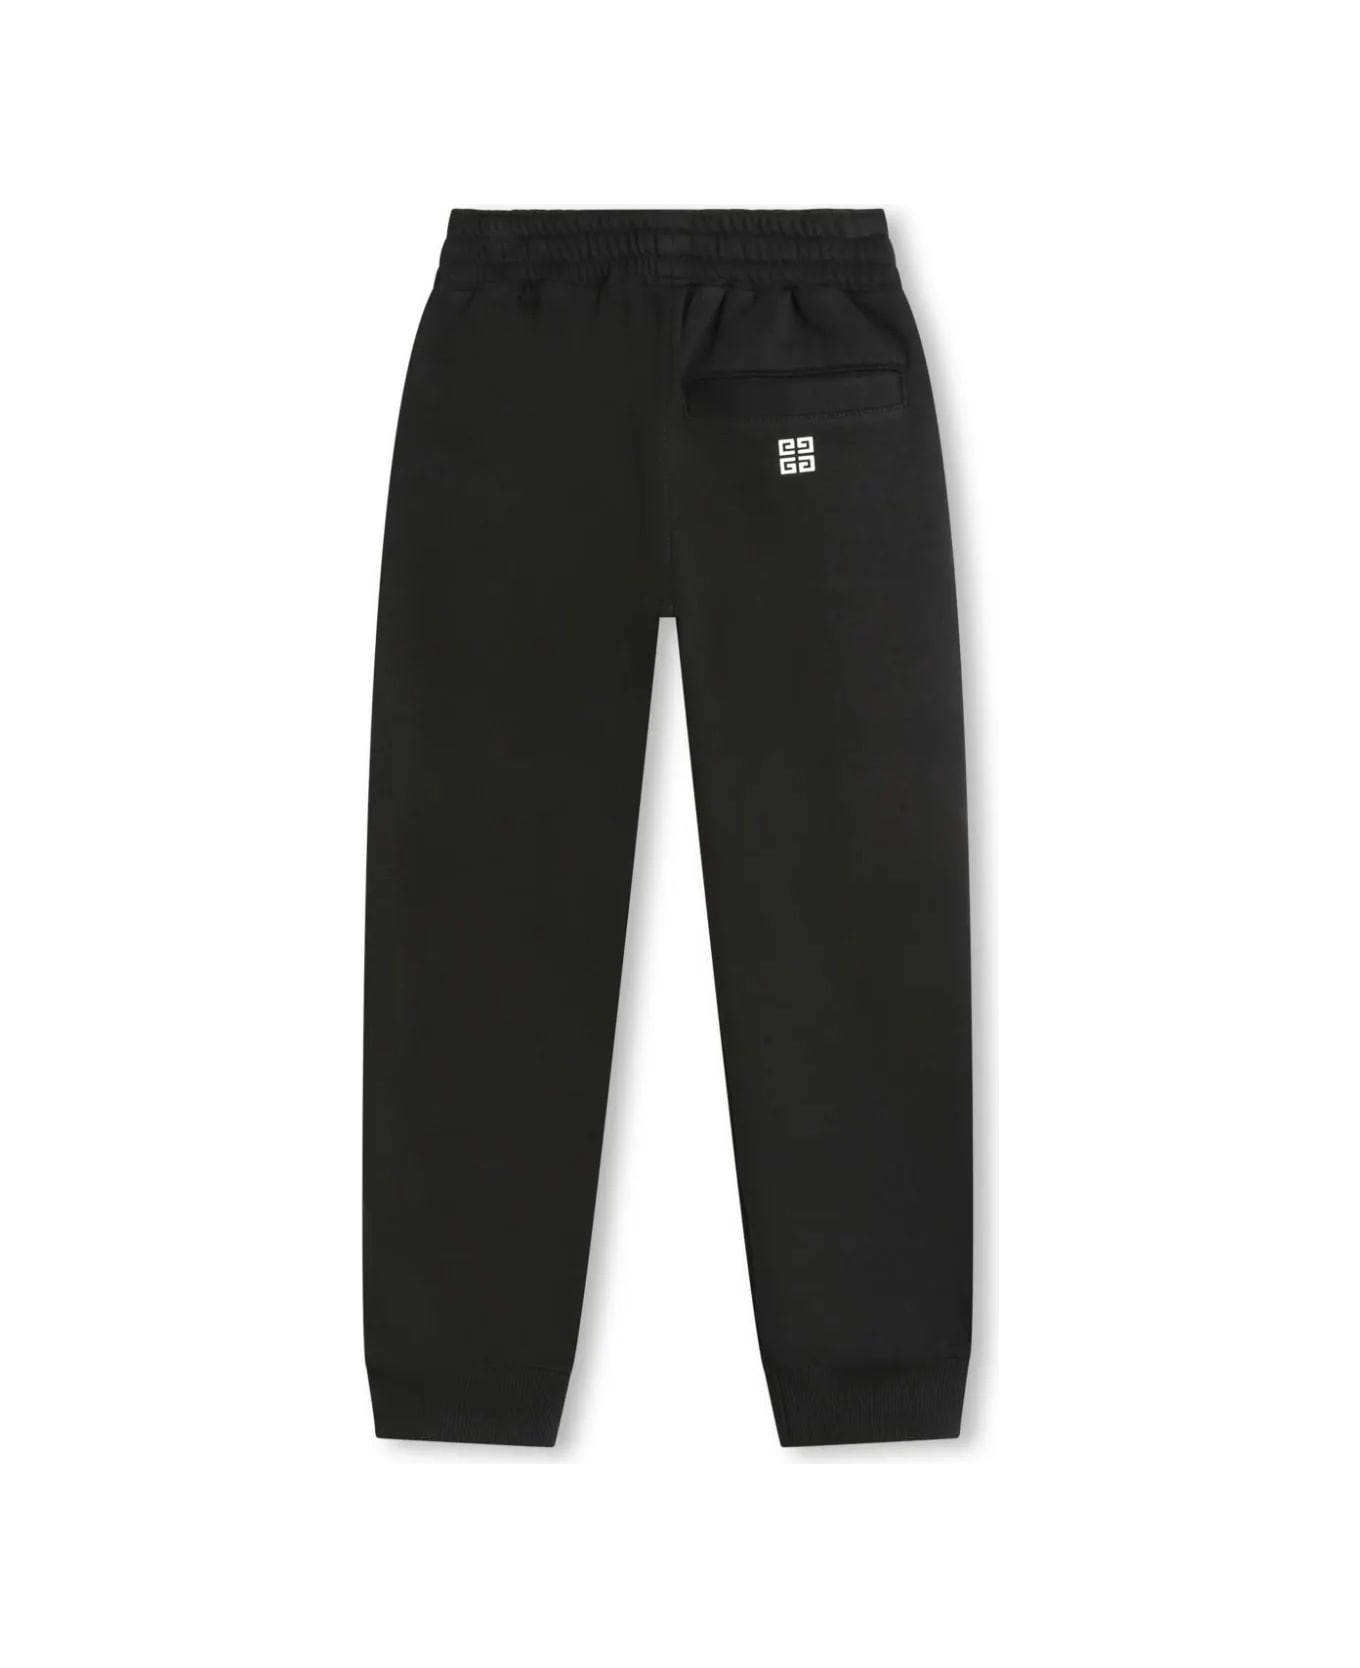 Givenchy Black Joggers With Arched Logo - Black